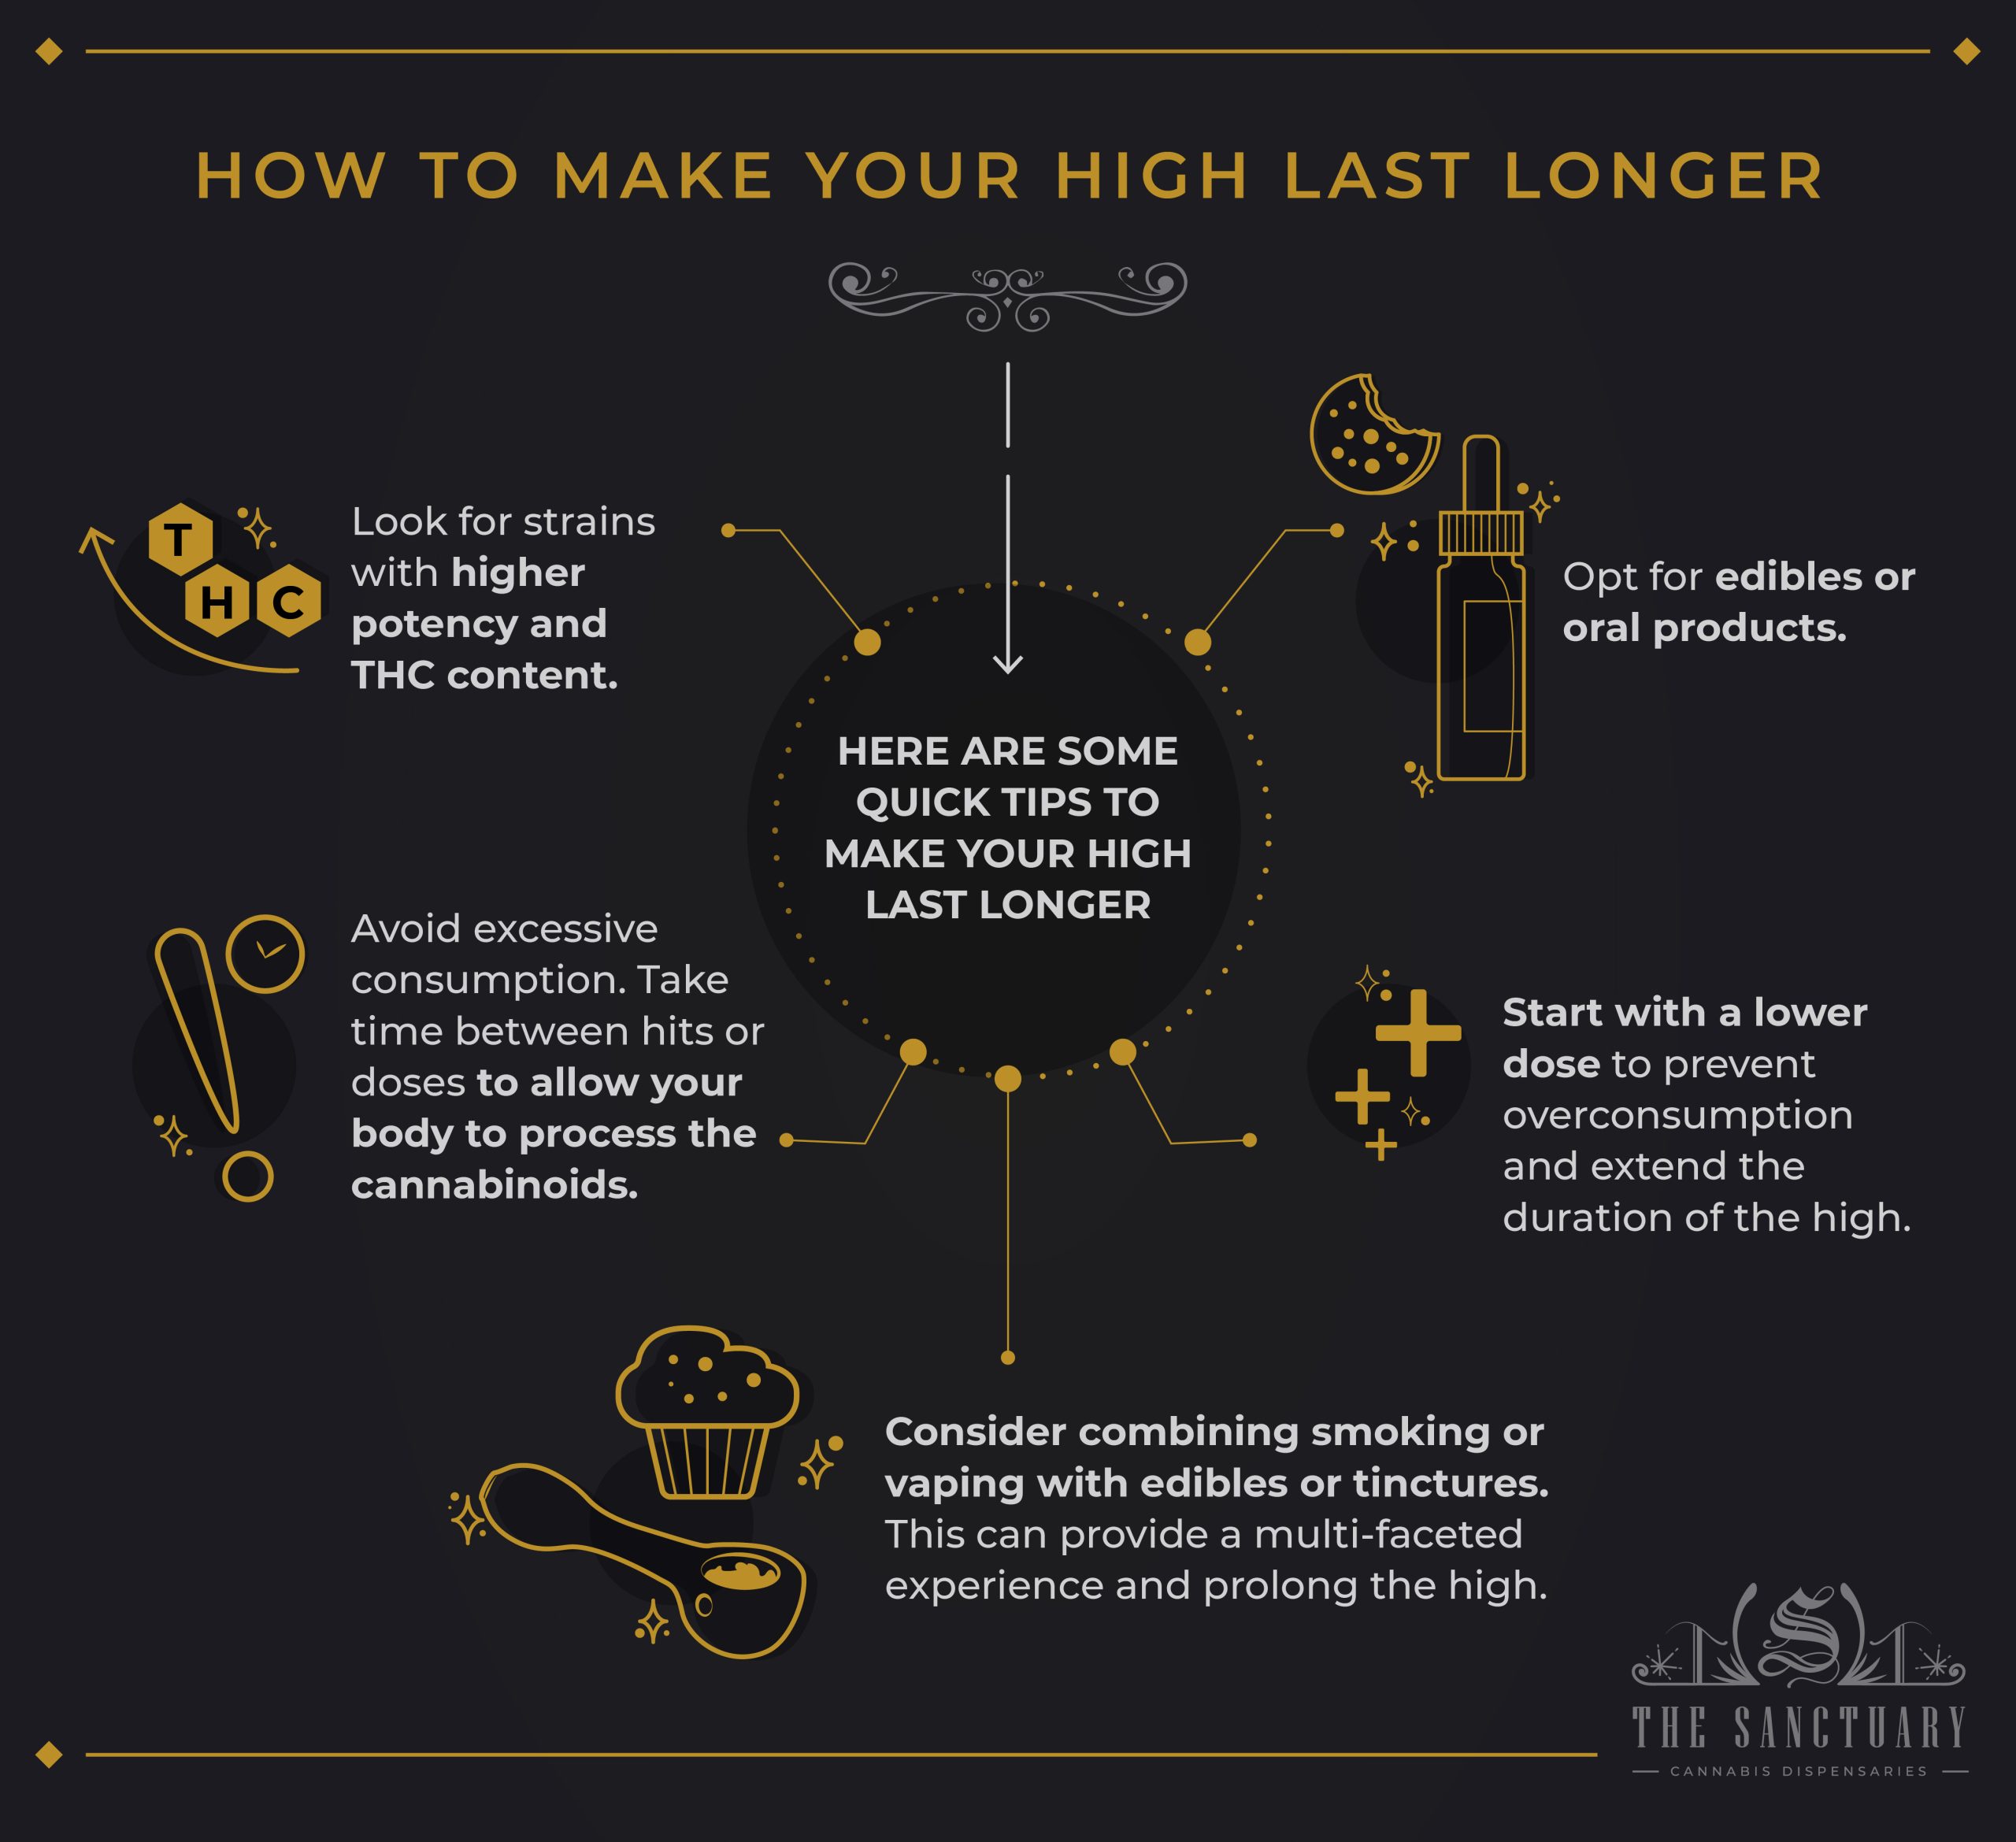 How to Make Your High Last Longer